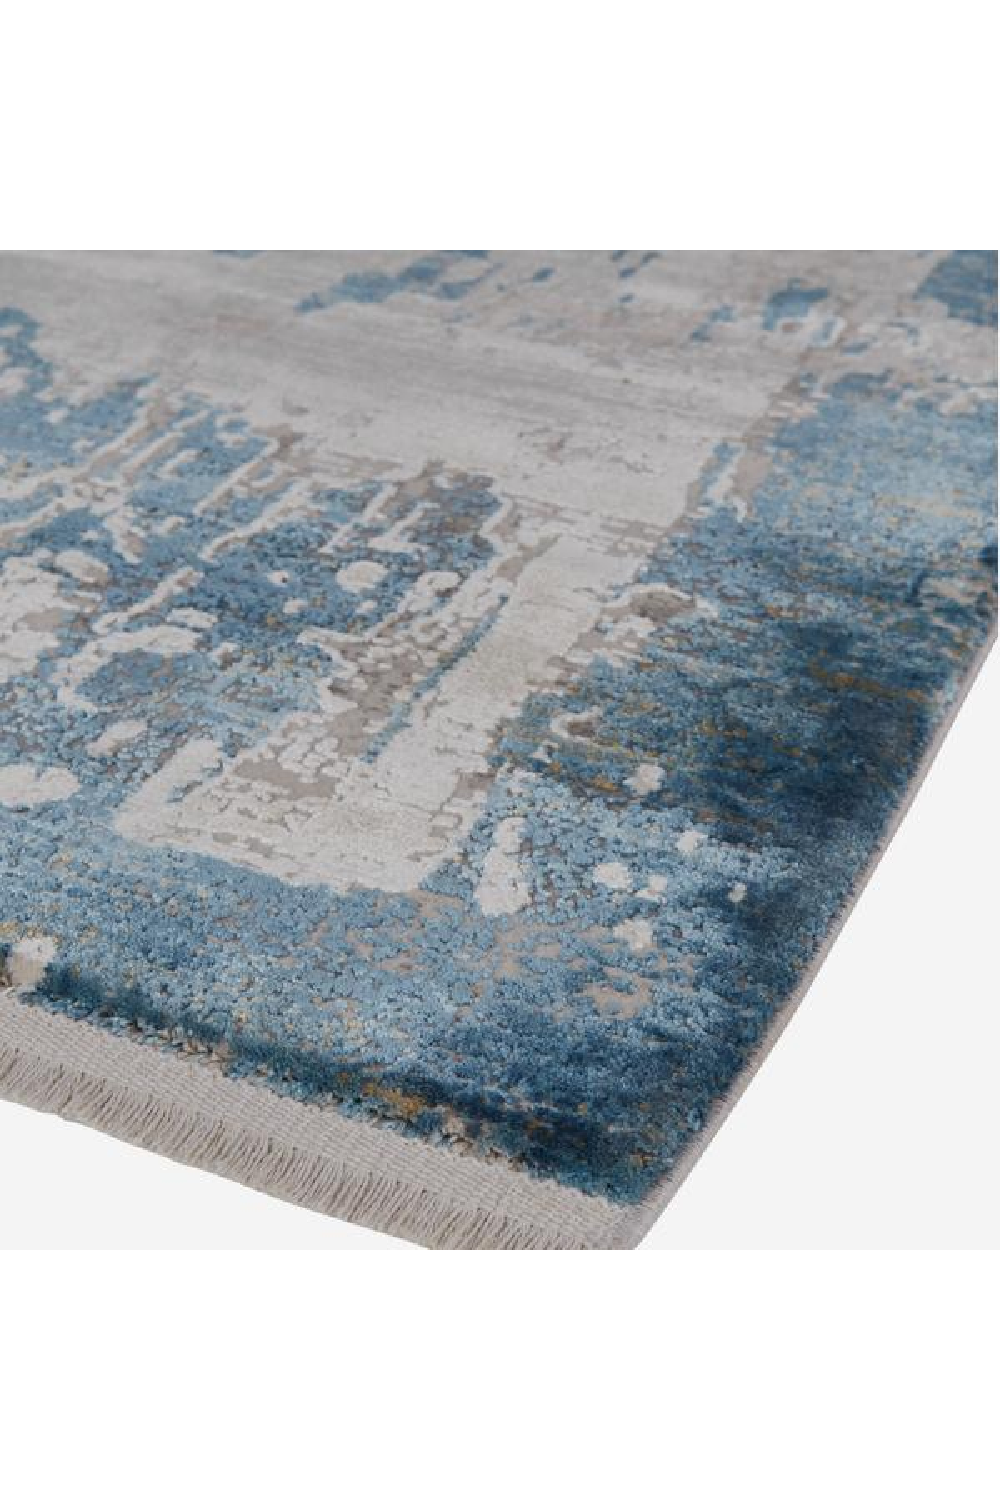 Blue and Beige Patterned Rug 5' x 7'5" | Andrew Martin Azra | Oroa.com